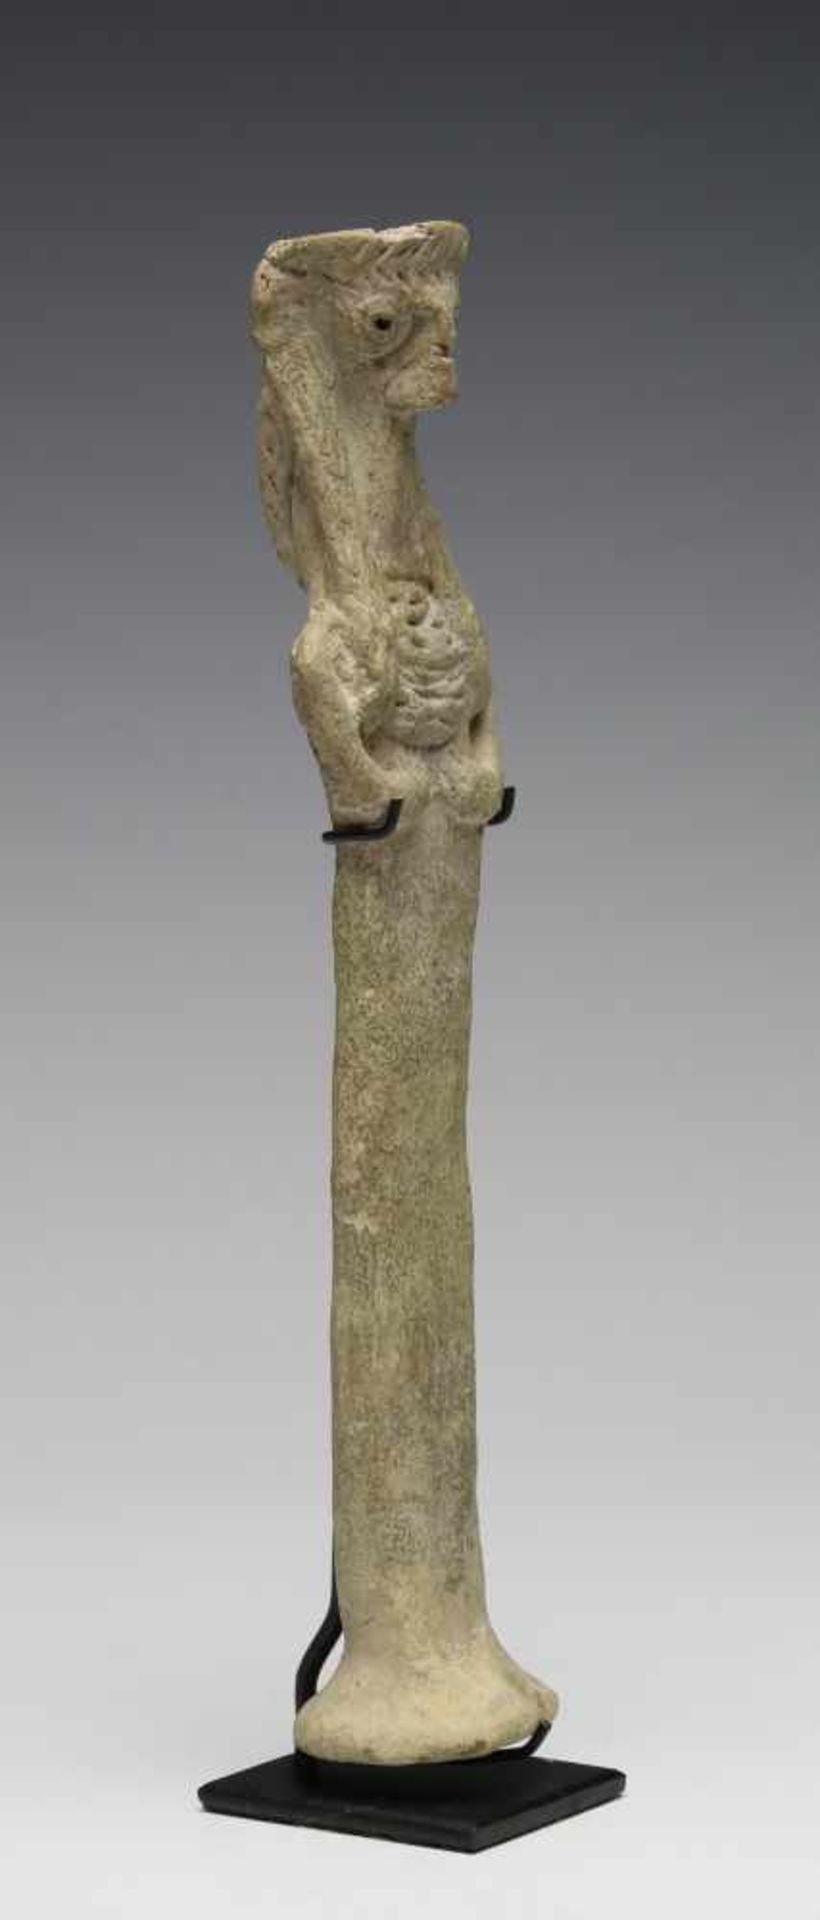 Norht Syrie, terracotta idol, 3rd - 2nd Mill BC,anthropomorphic-zoomorphic facial experssion, folded